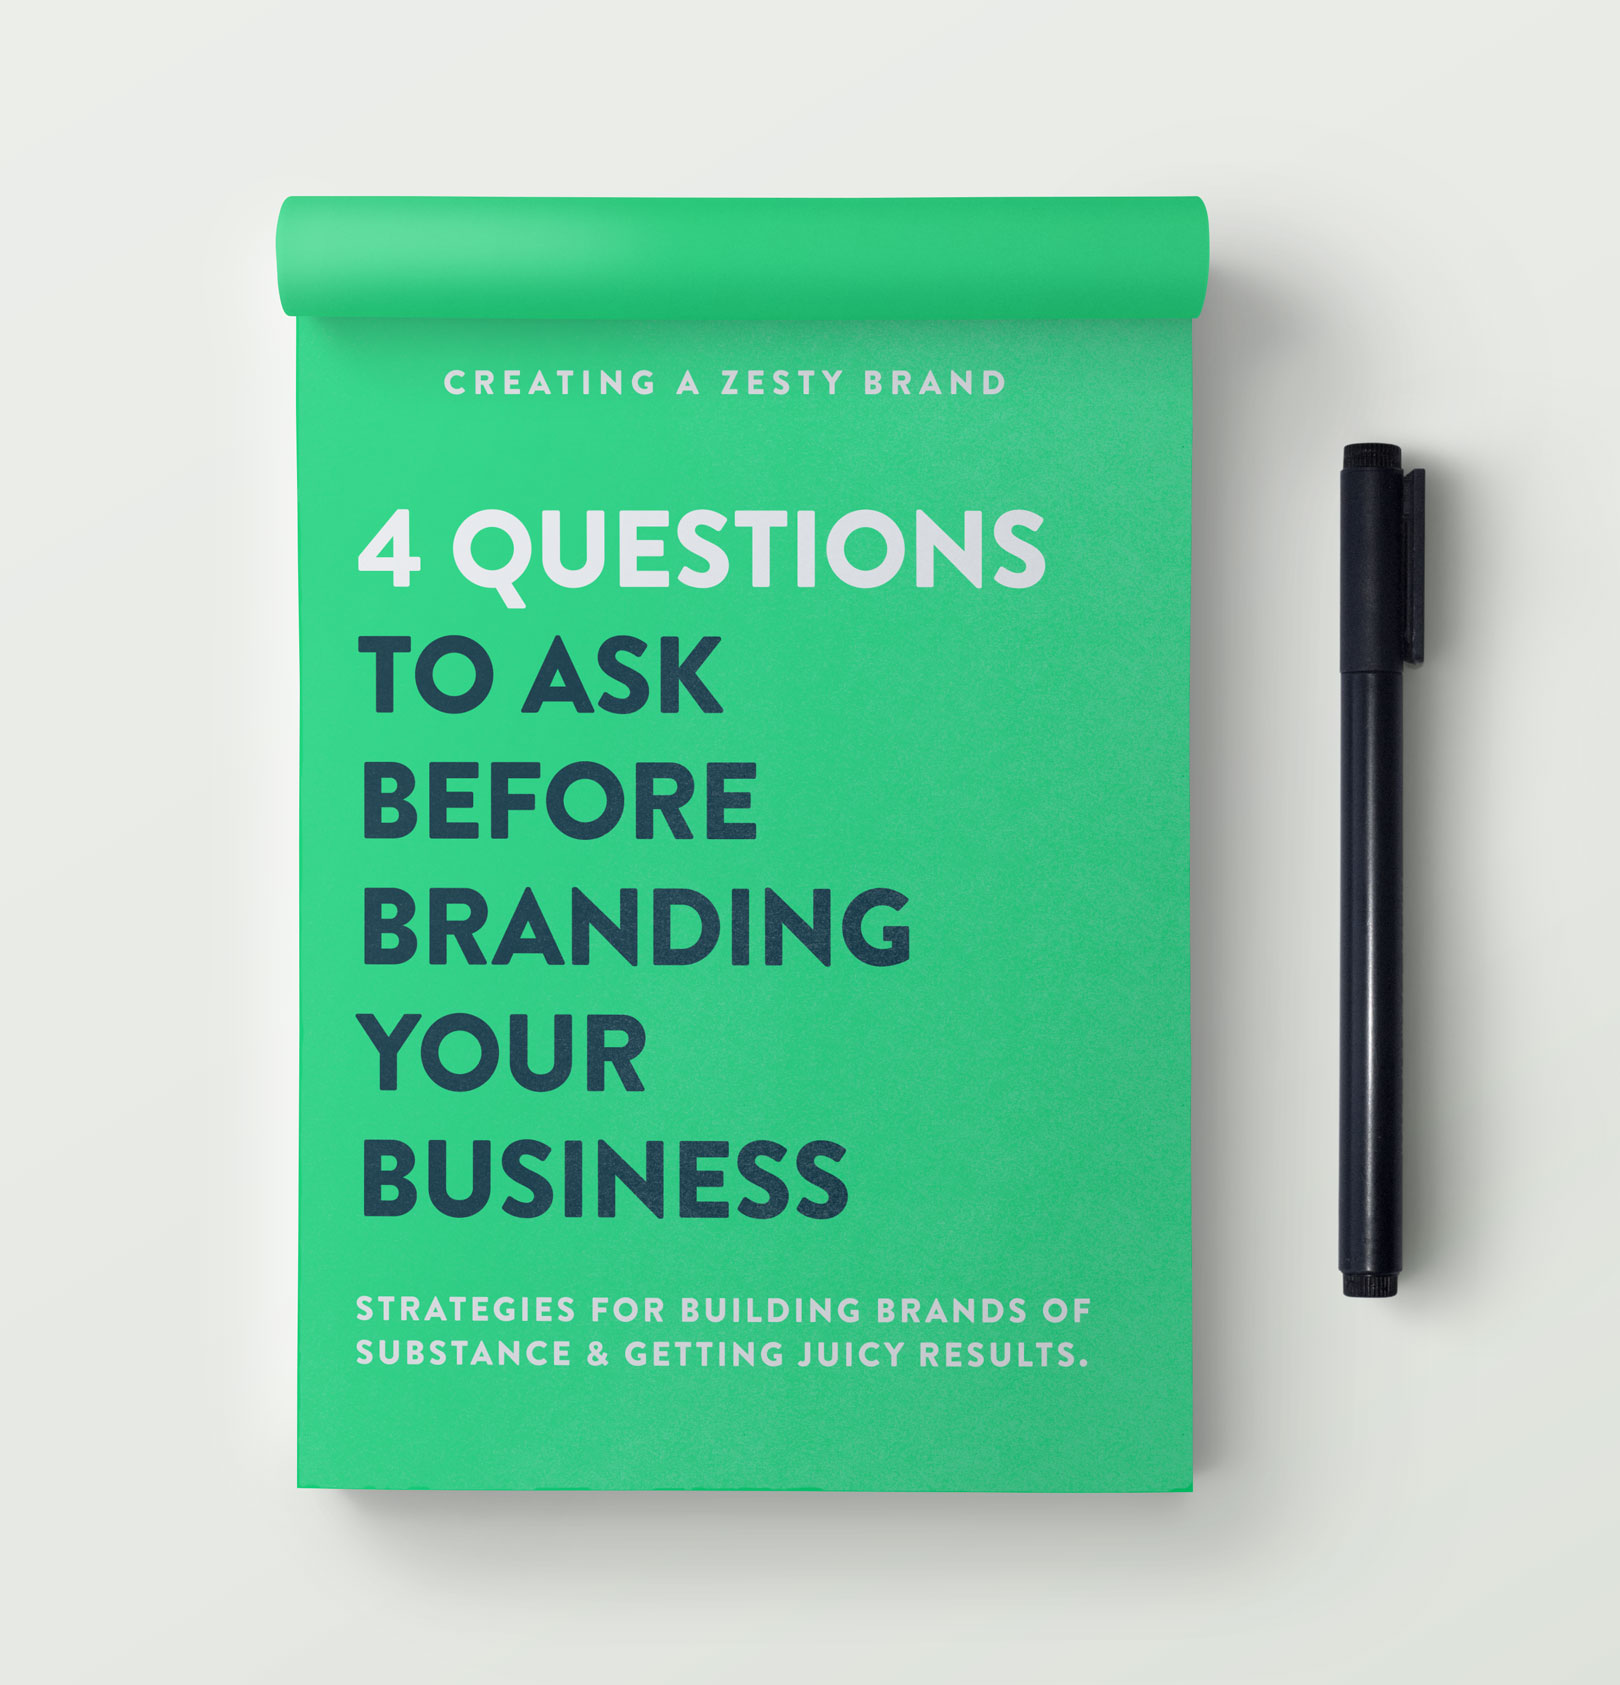 https://zestybrands.ca/wp-content/uploads/2019/05/vancouver-branding-agency-how-to-launch-a-brand-questions.jpg